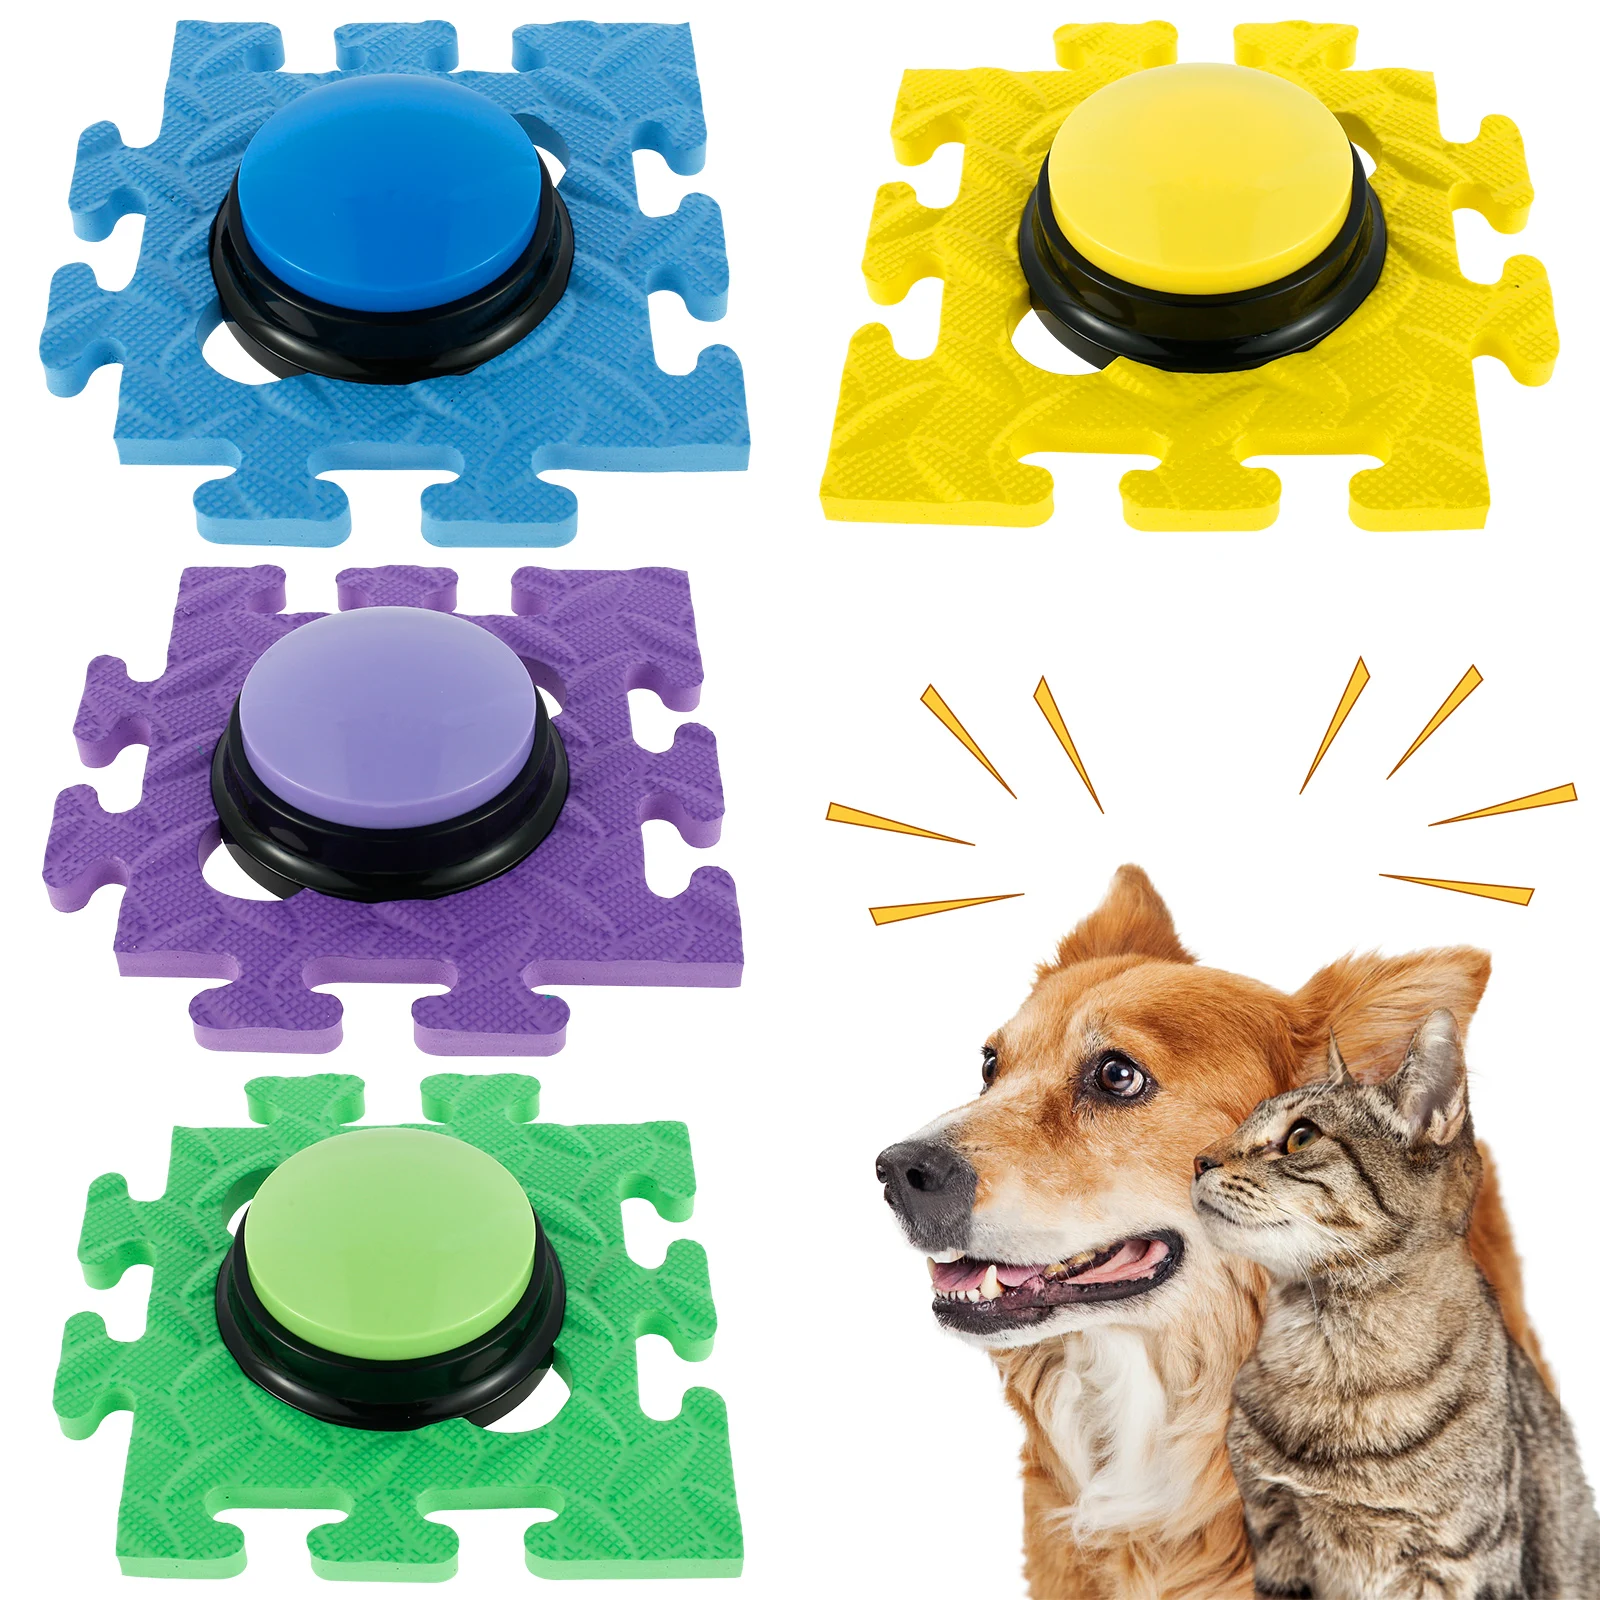 

30 Dog With Talking For 4pcs Buzzer Training Dogs Anti-slip Talking Recording Dog Seconds Button Buttons Recordable Pad Voice